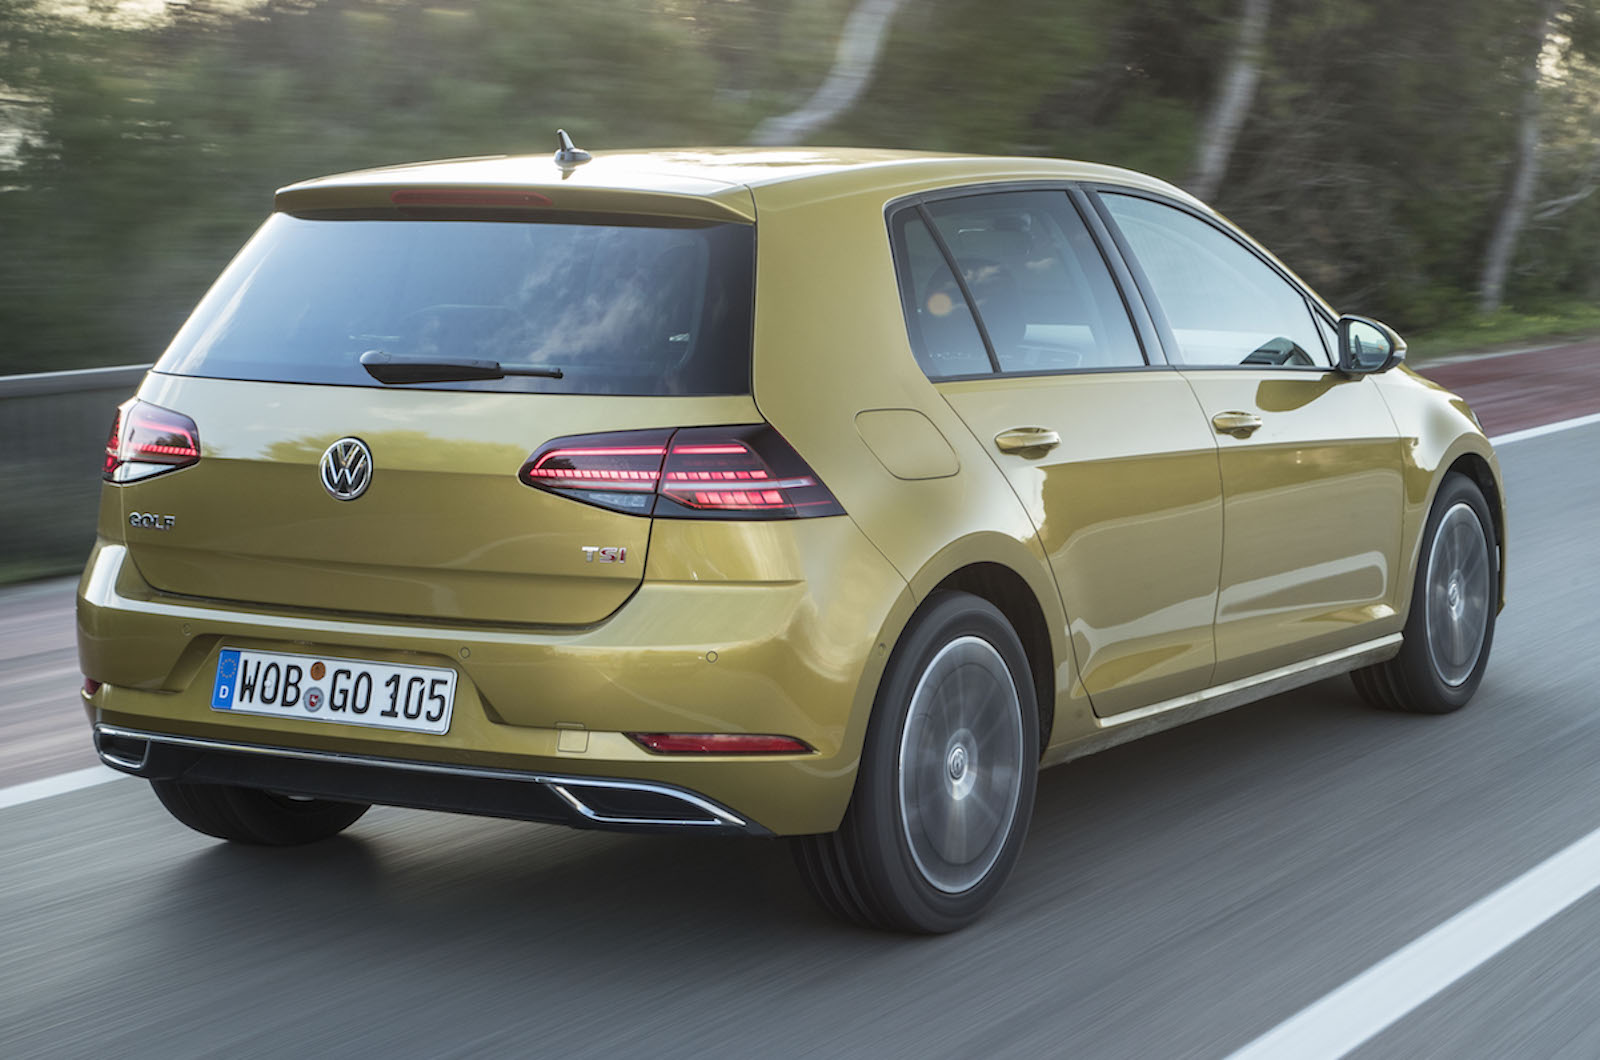 Next-Gen Volkswagen Polo To Come with 150hp 1.5L TSI Engine?